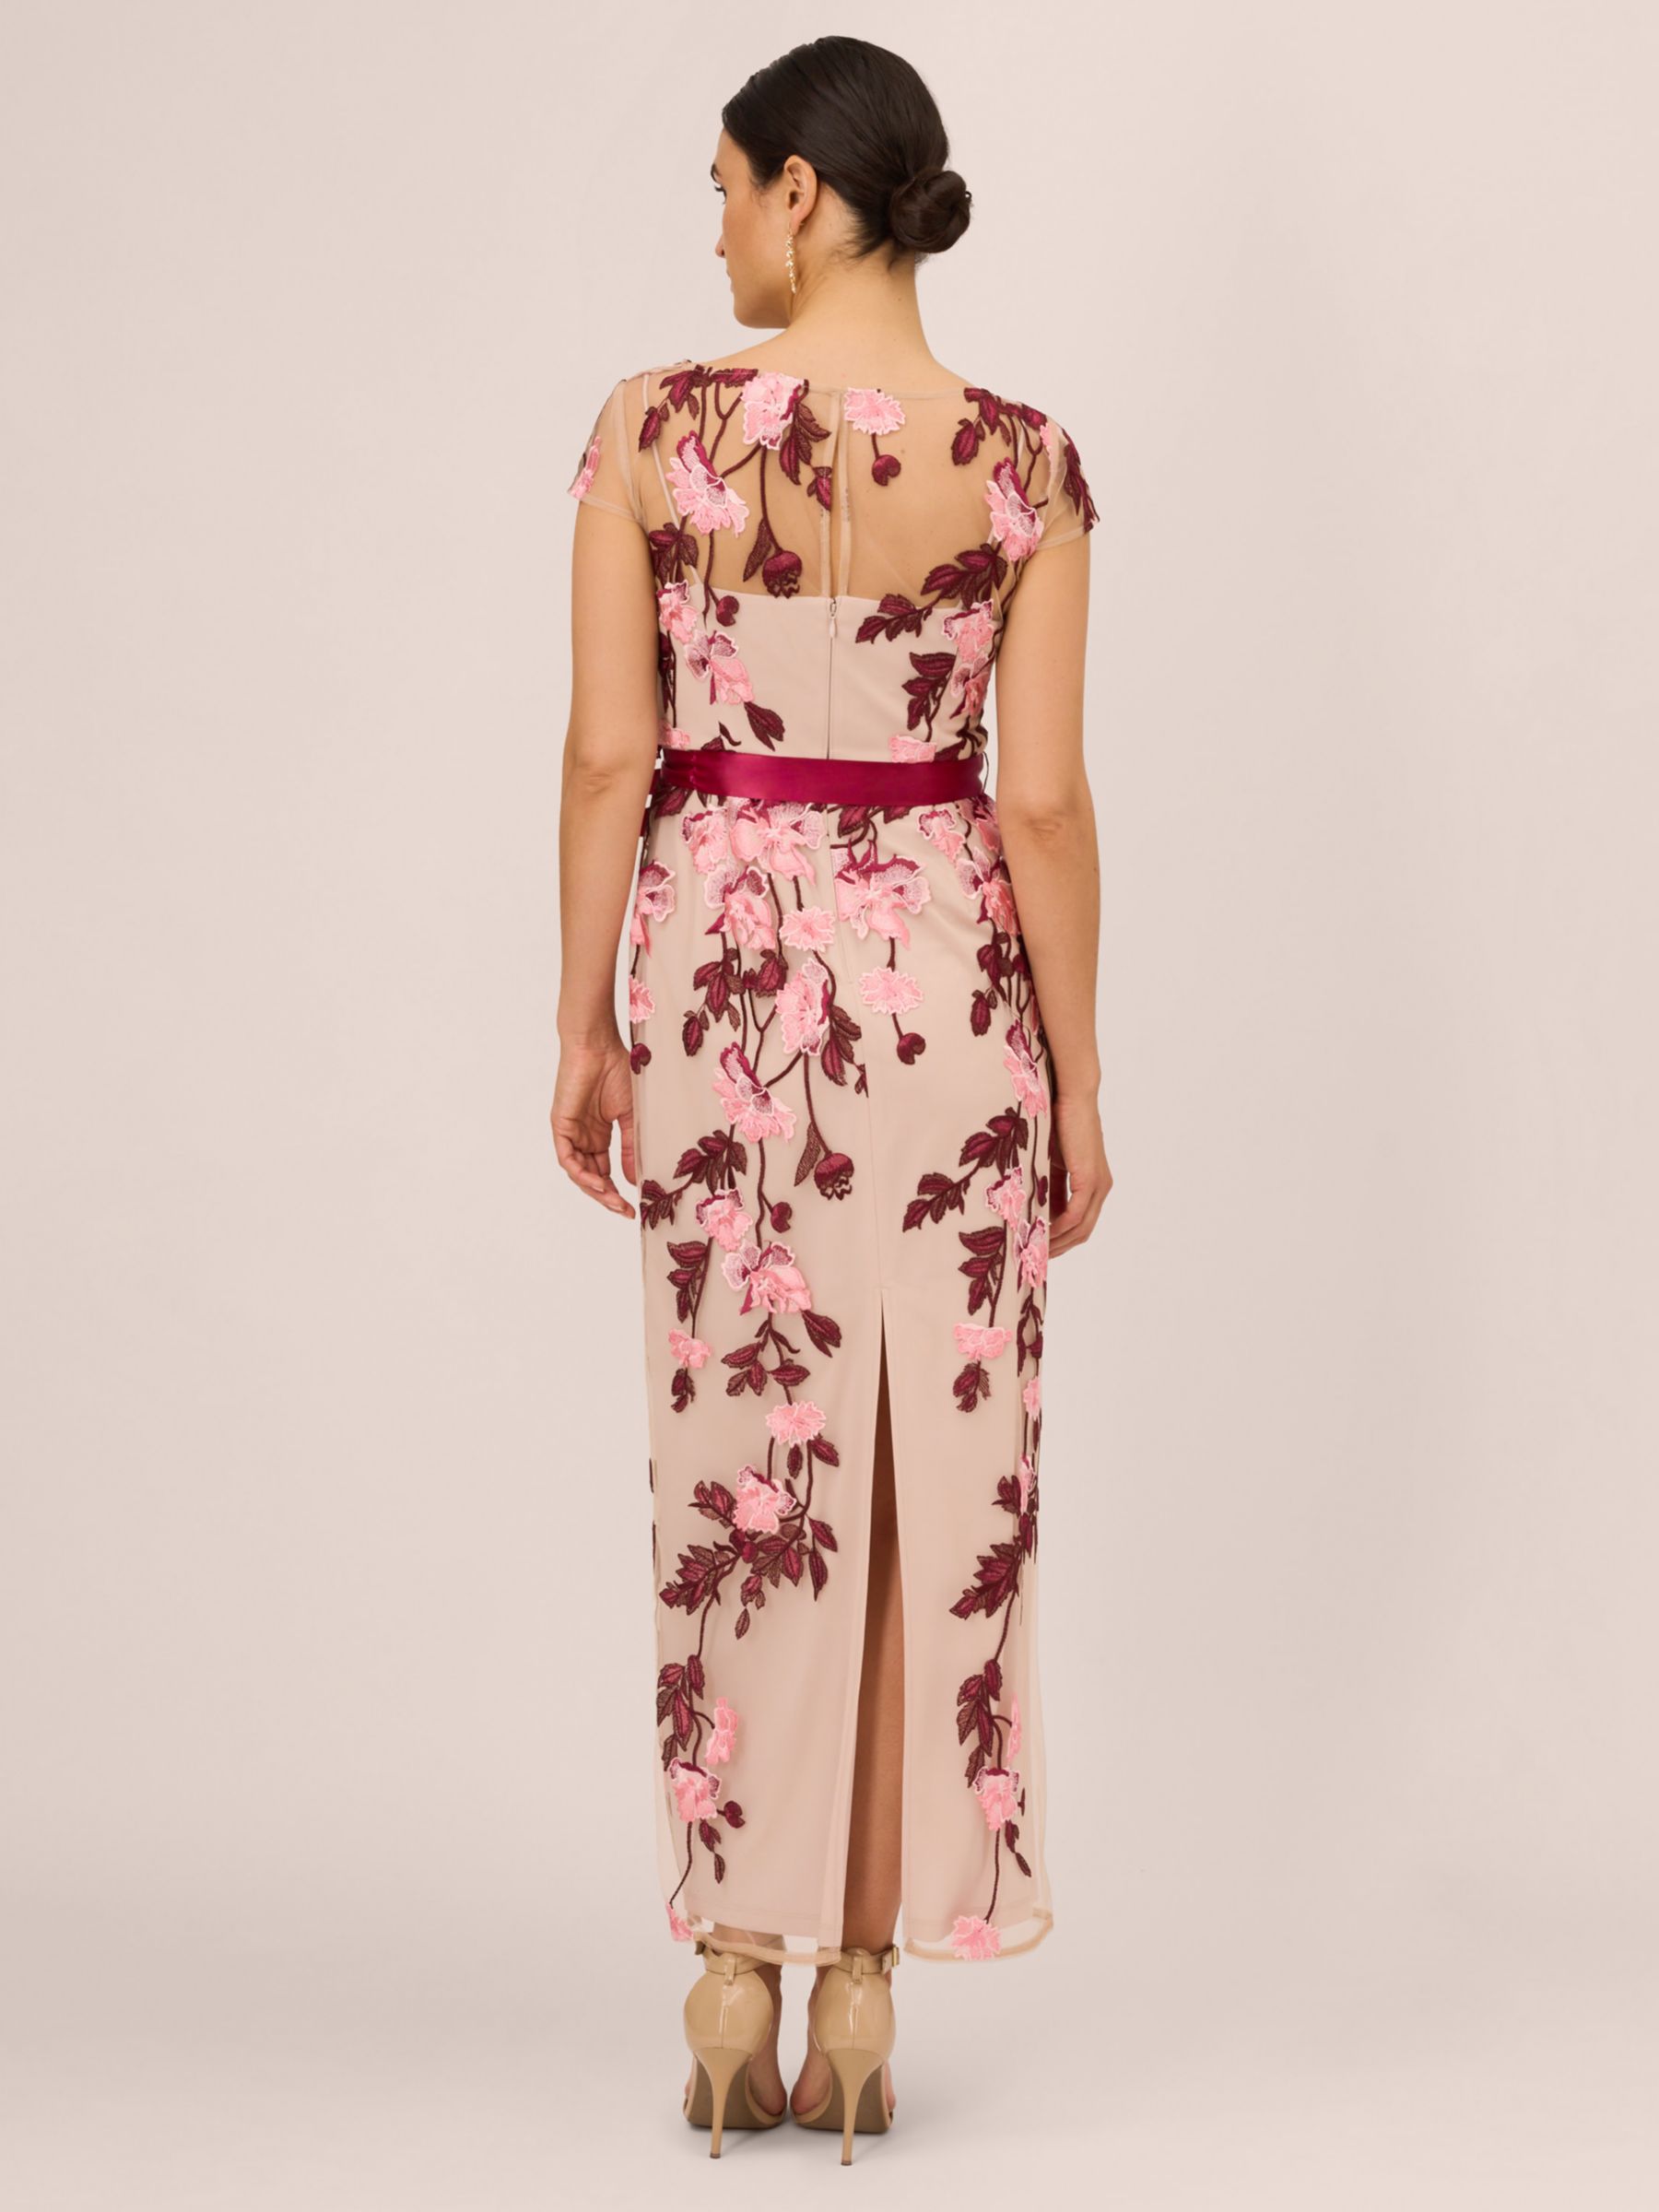 Adrianna Papell Floral Embroidered Maxi Dress, Merlot/Multi at